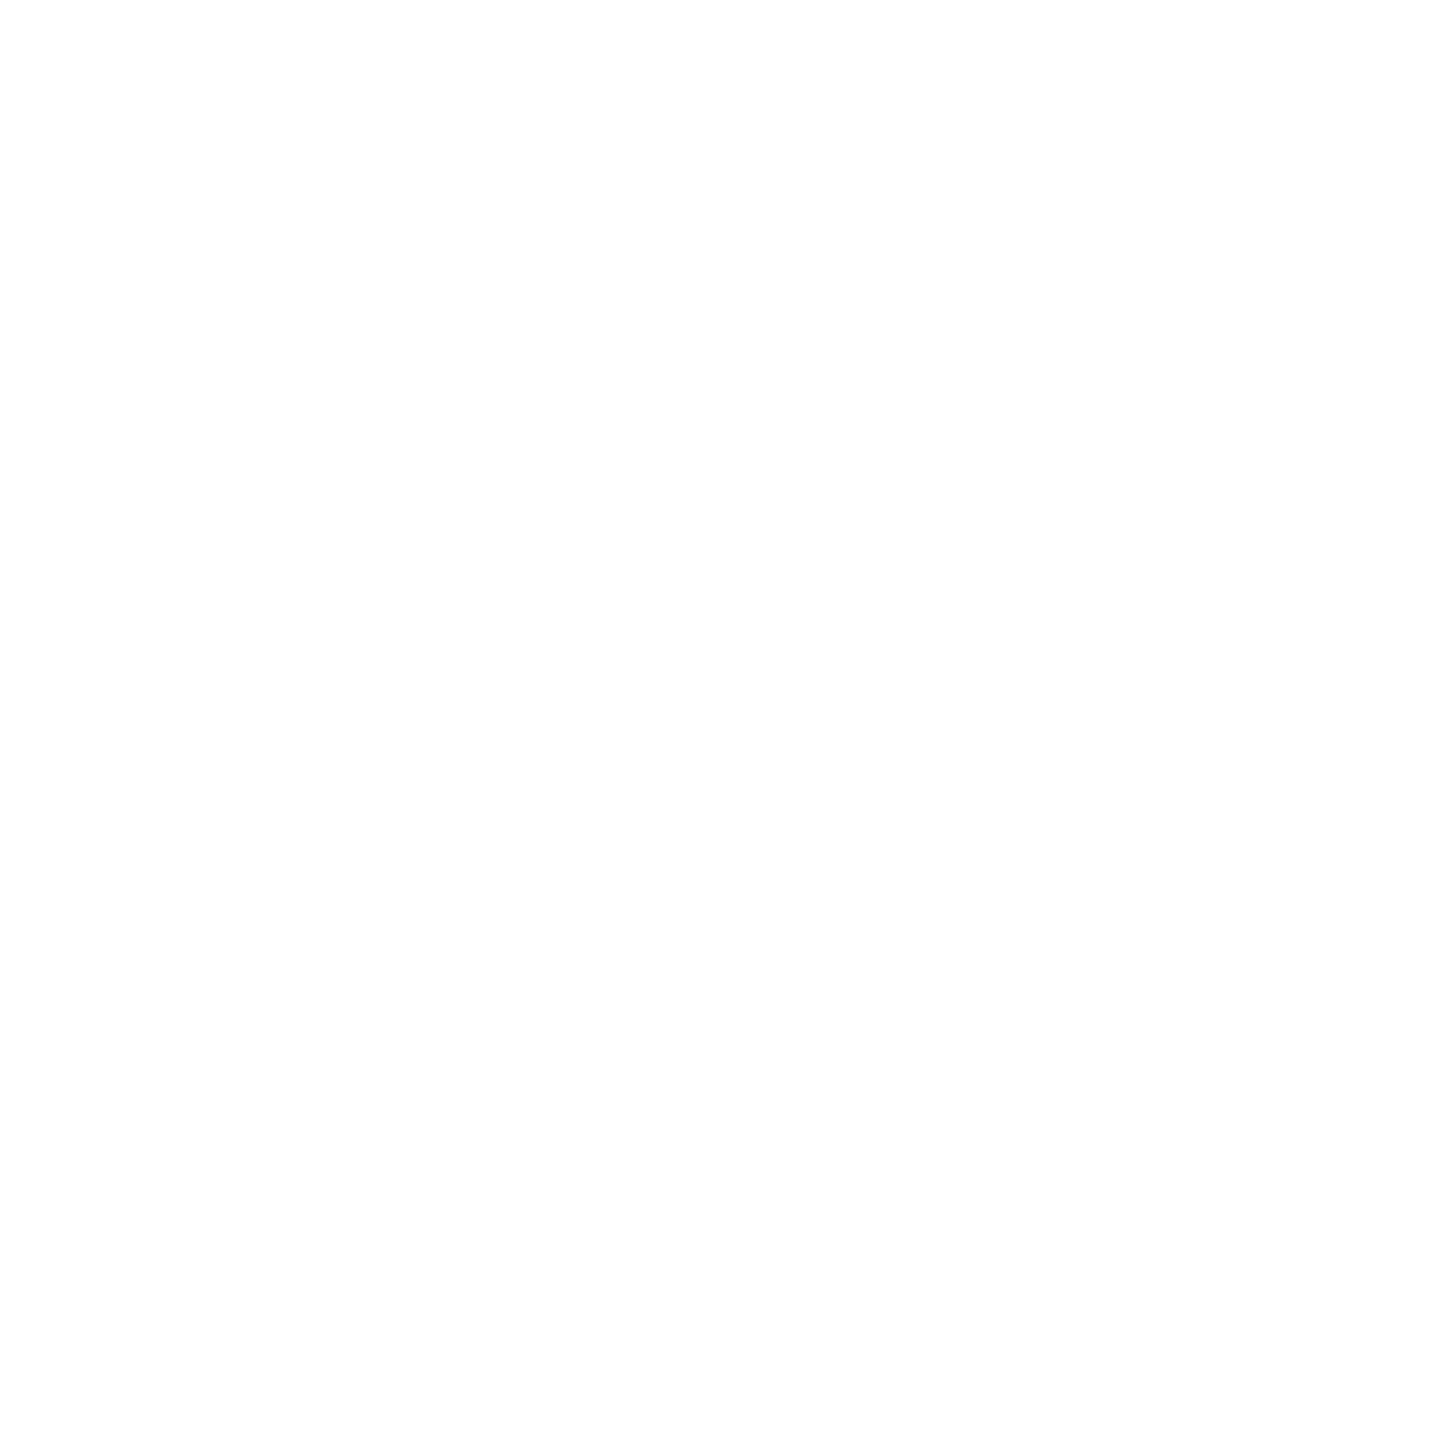 Ghosting means never having to say goodbye